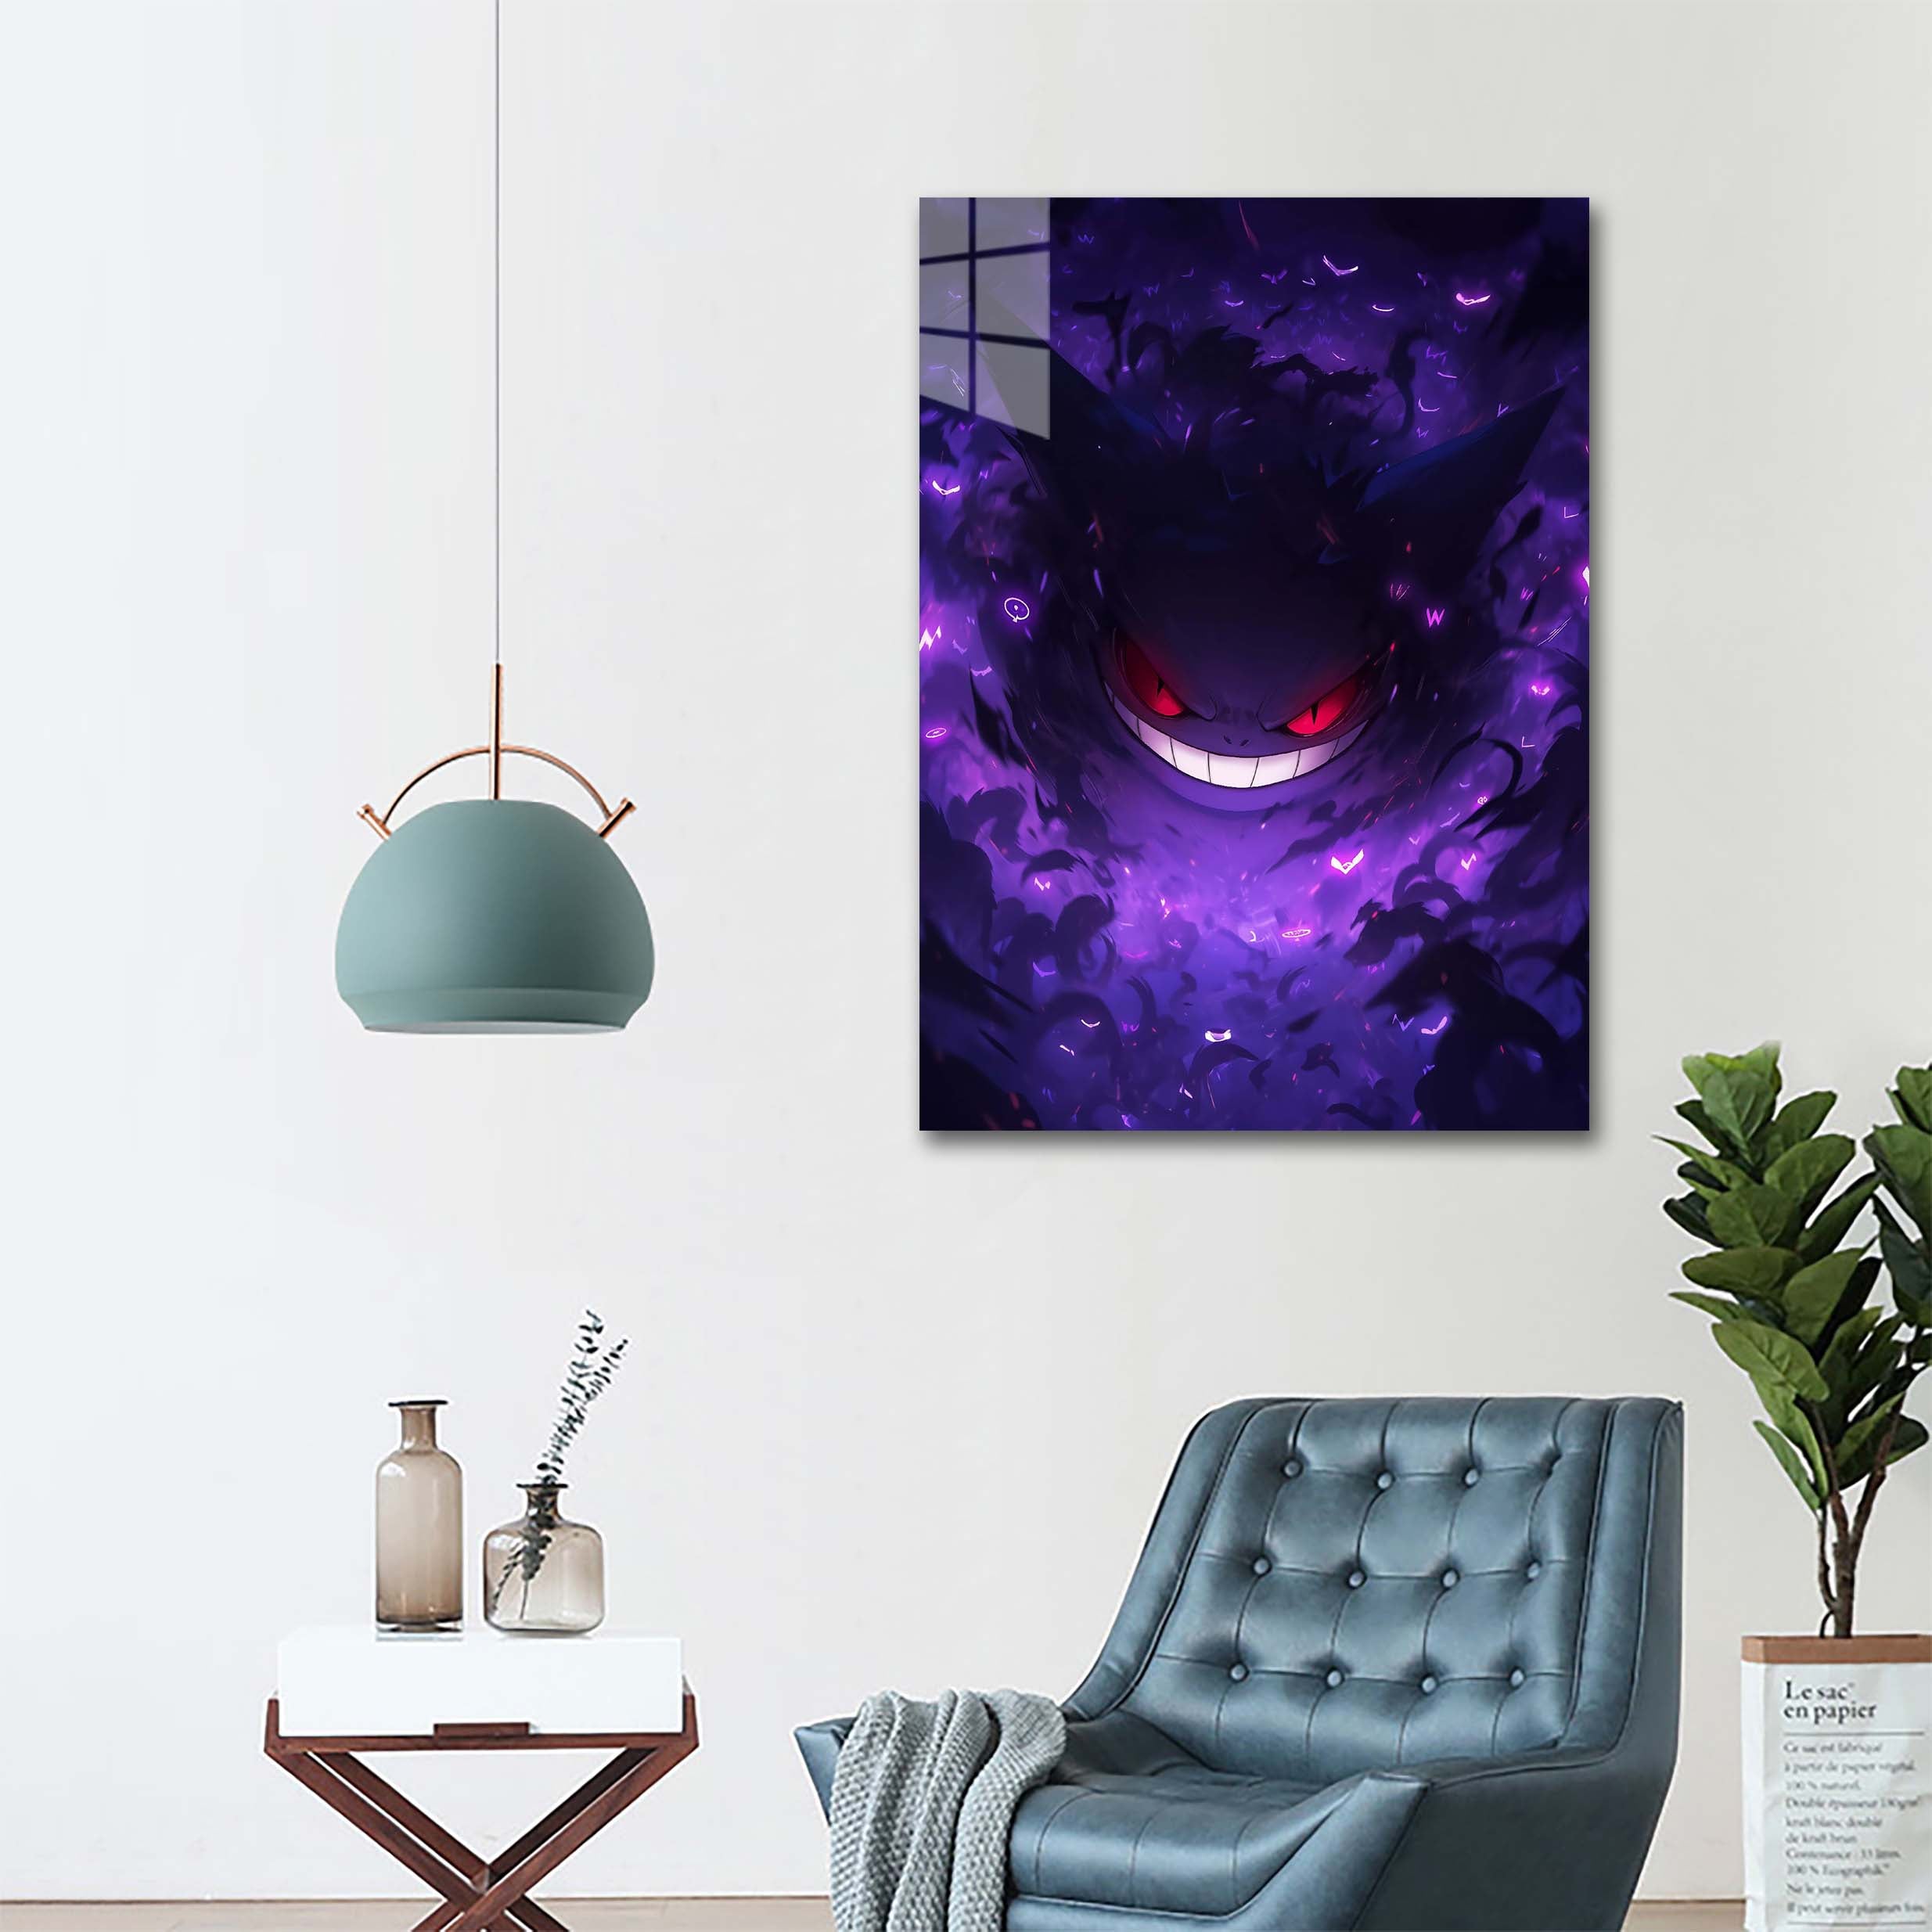 Gengar - Dream Eater! -designed by @EosVisions